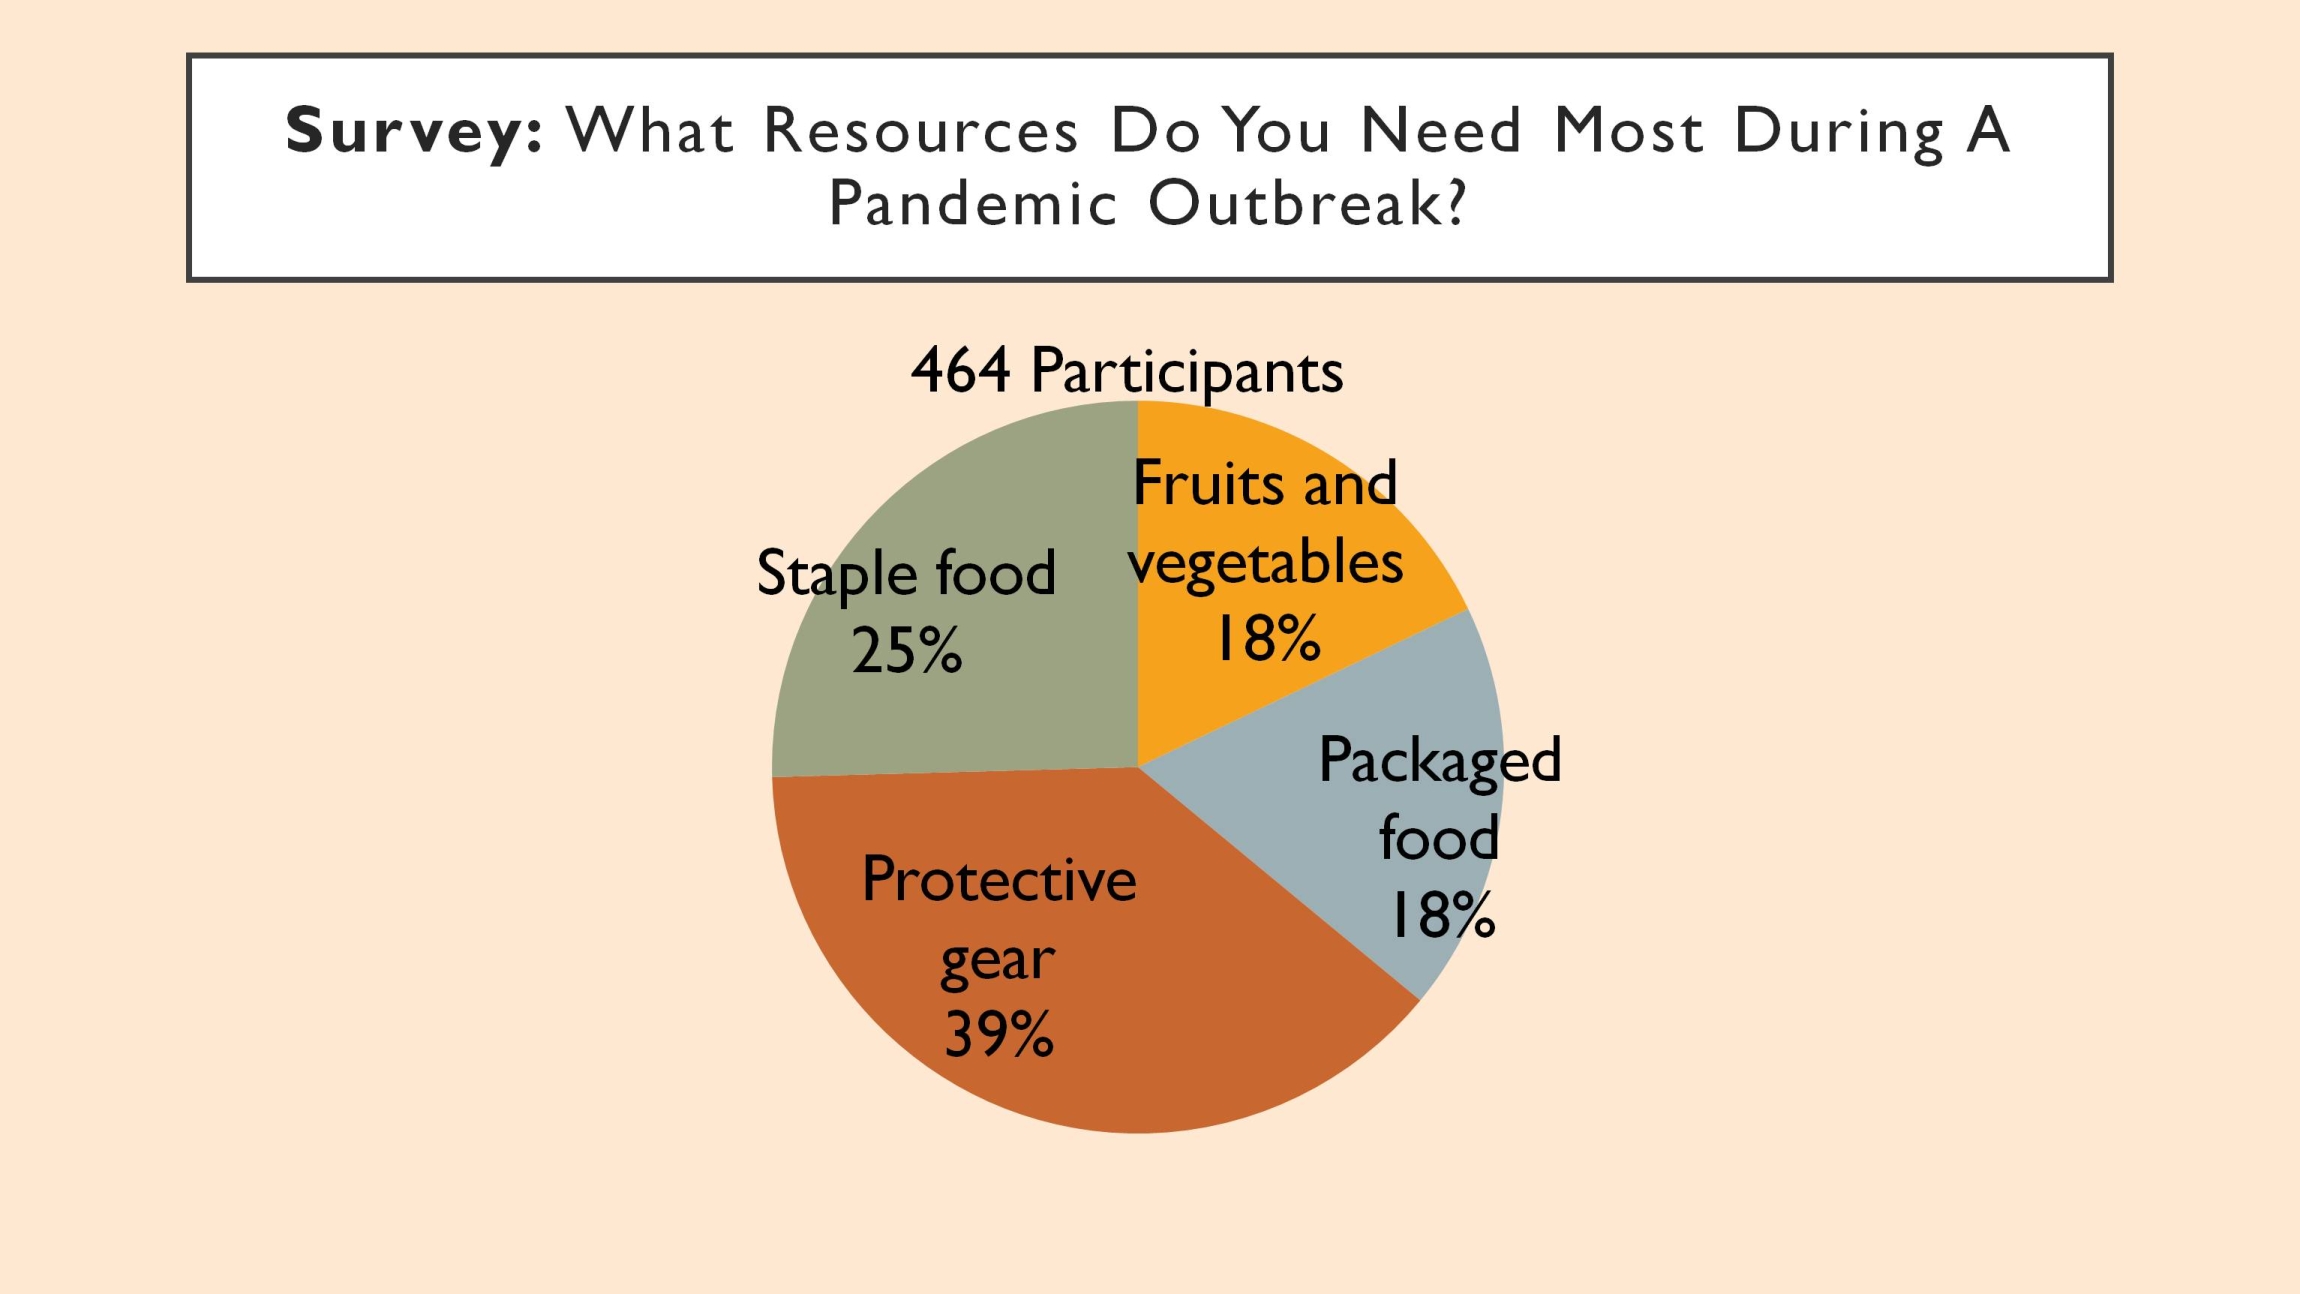 Self Photos / Files - Survey: What Resources Do you Need Most During A Pandemic Outbreak? 464 participants, Protective gear 39%, staple food 25%, fruits and vegetables 18%, Packaged food 18%